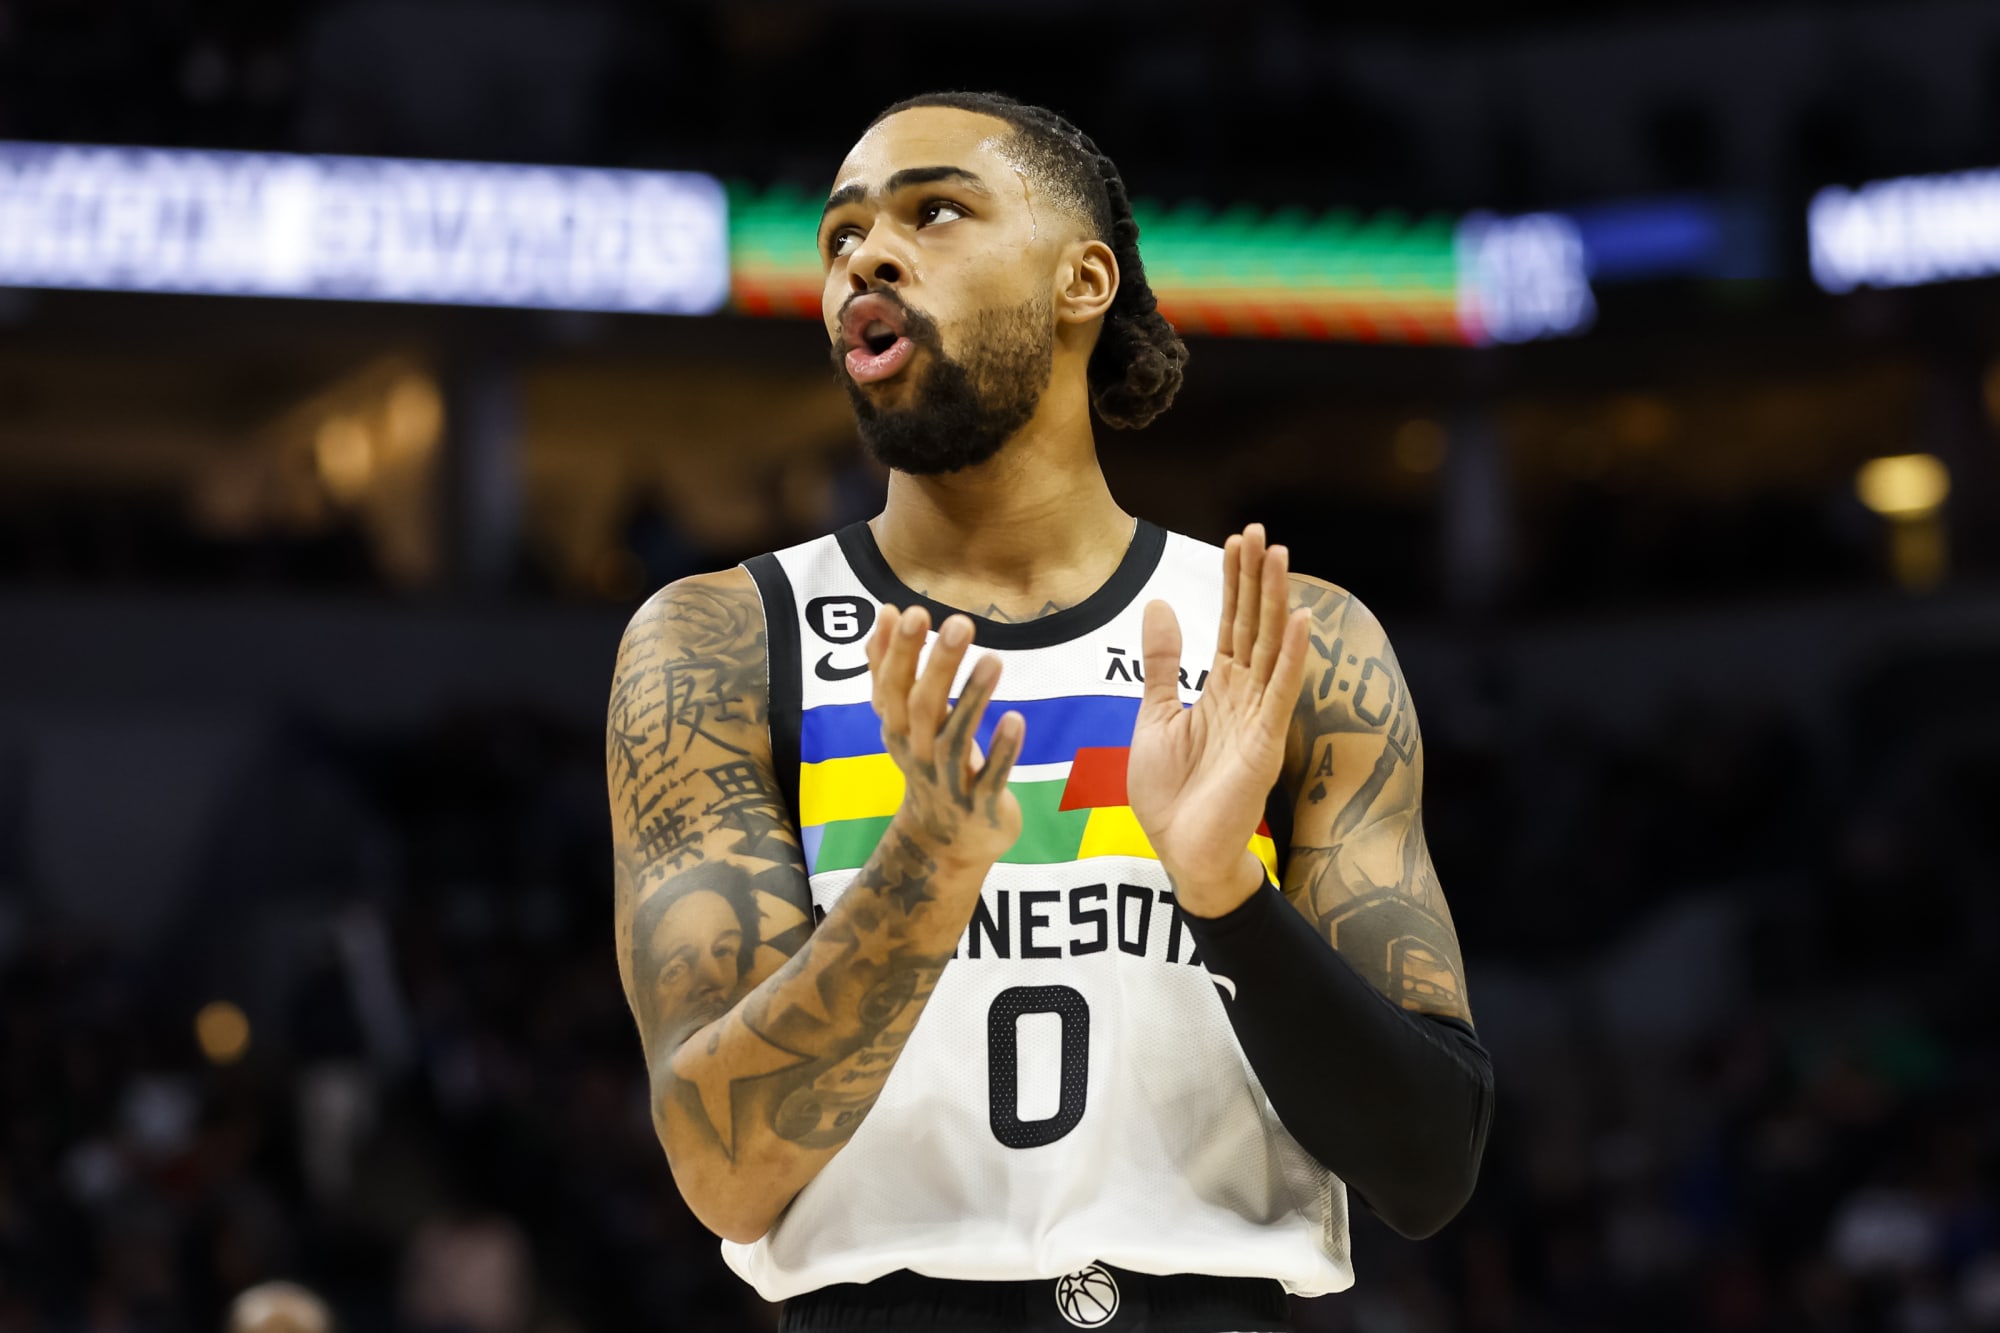 Wolves mailbag (part 2): How does D'Lo benefit from the addition of Rudy  Gobert?